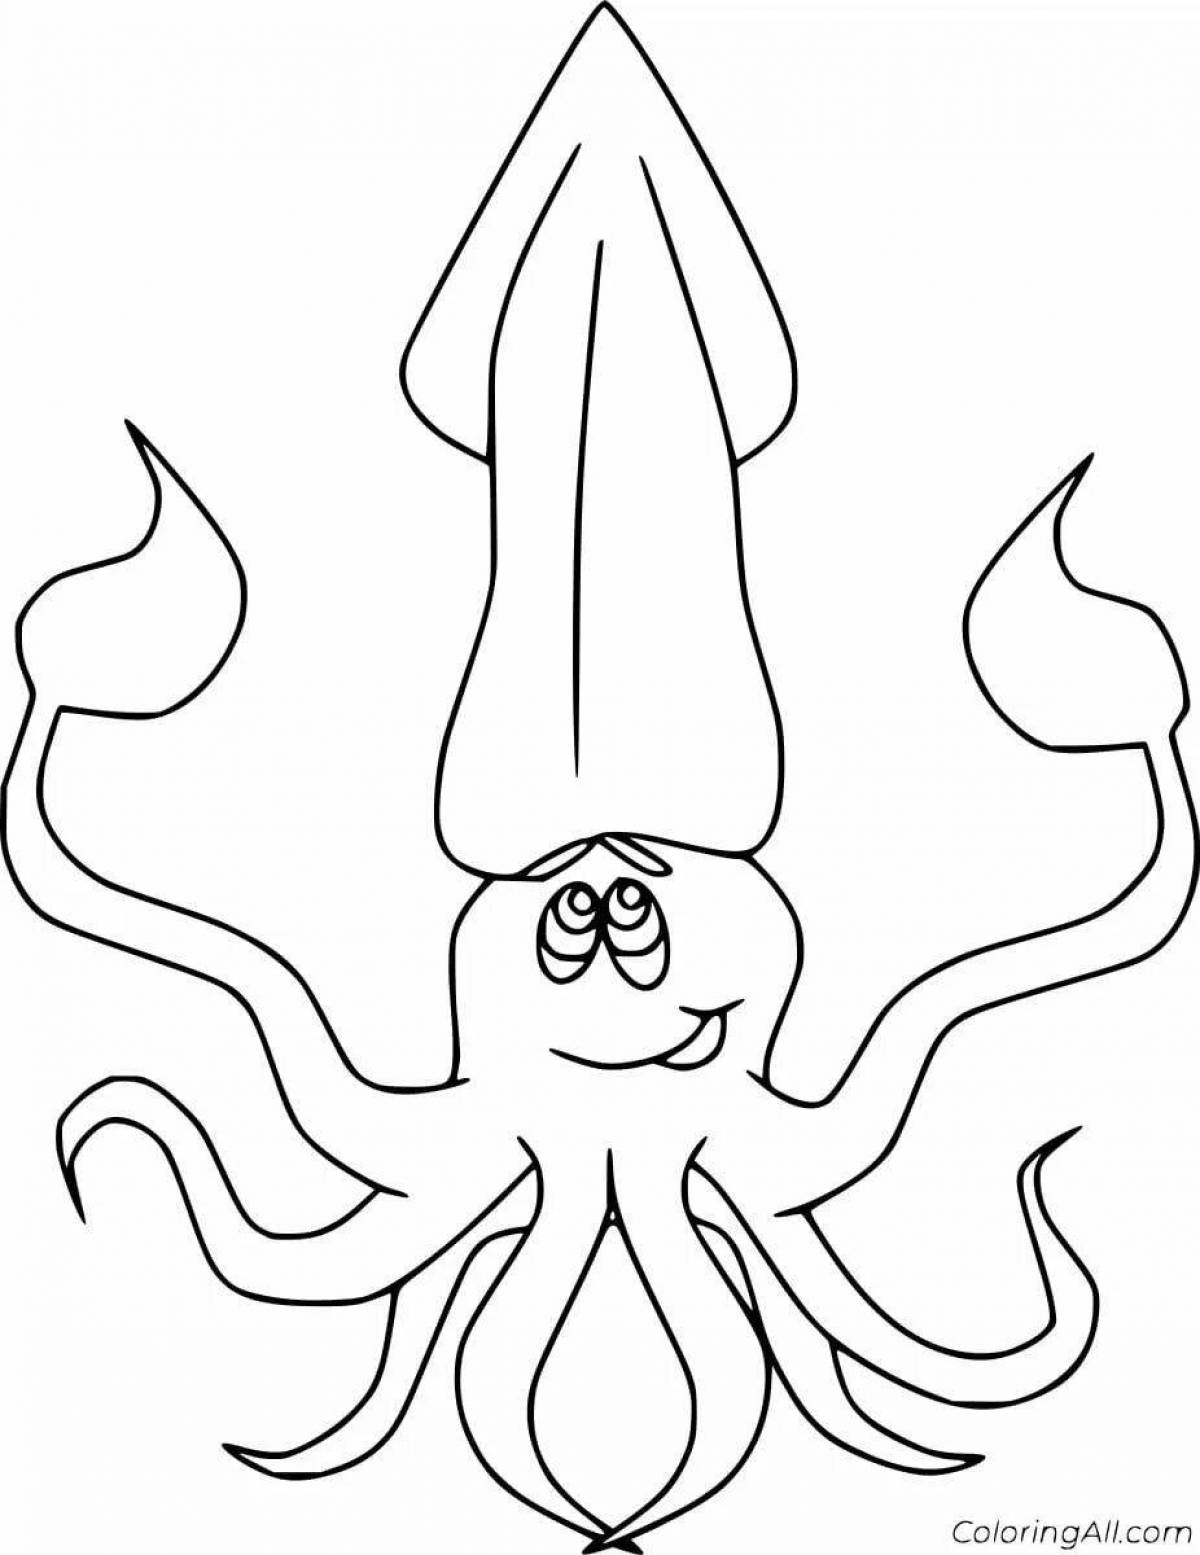 Colorful squid coloring page for kids